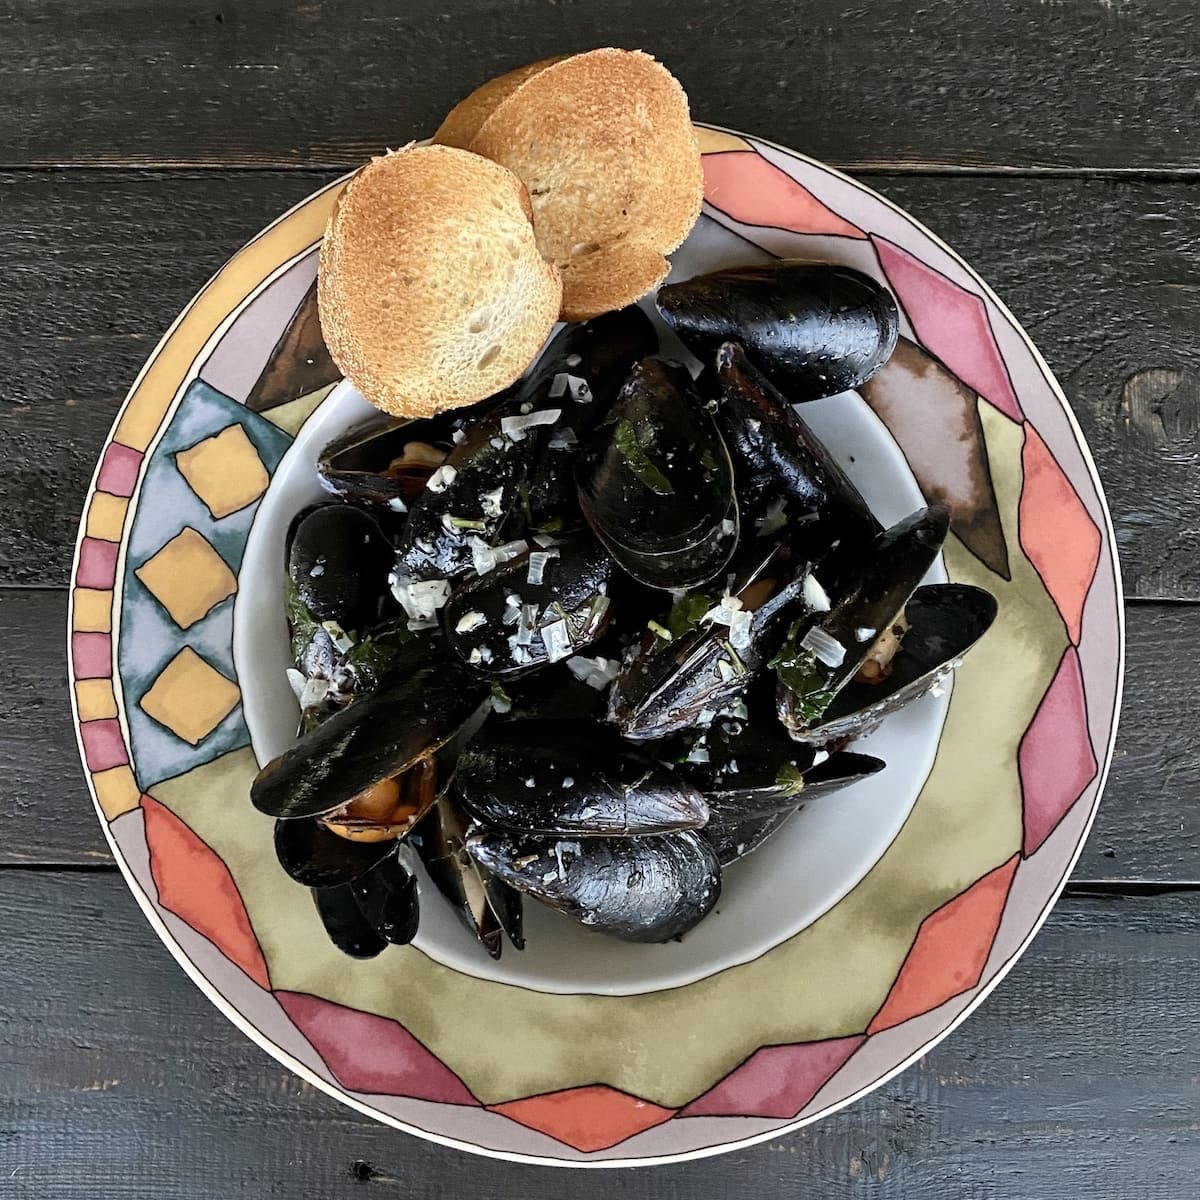 Mussels in serving bowl with slices of toasted bread on side.